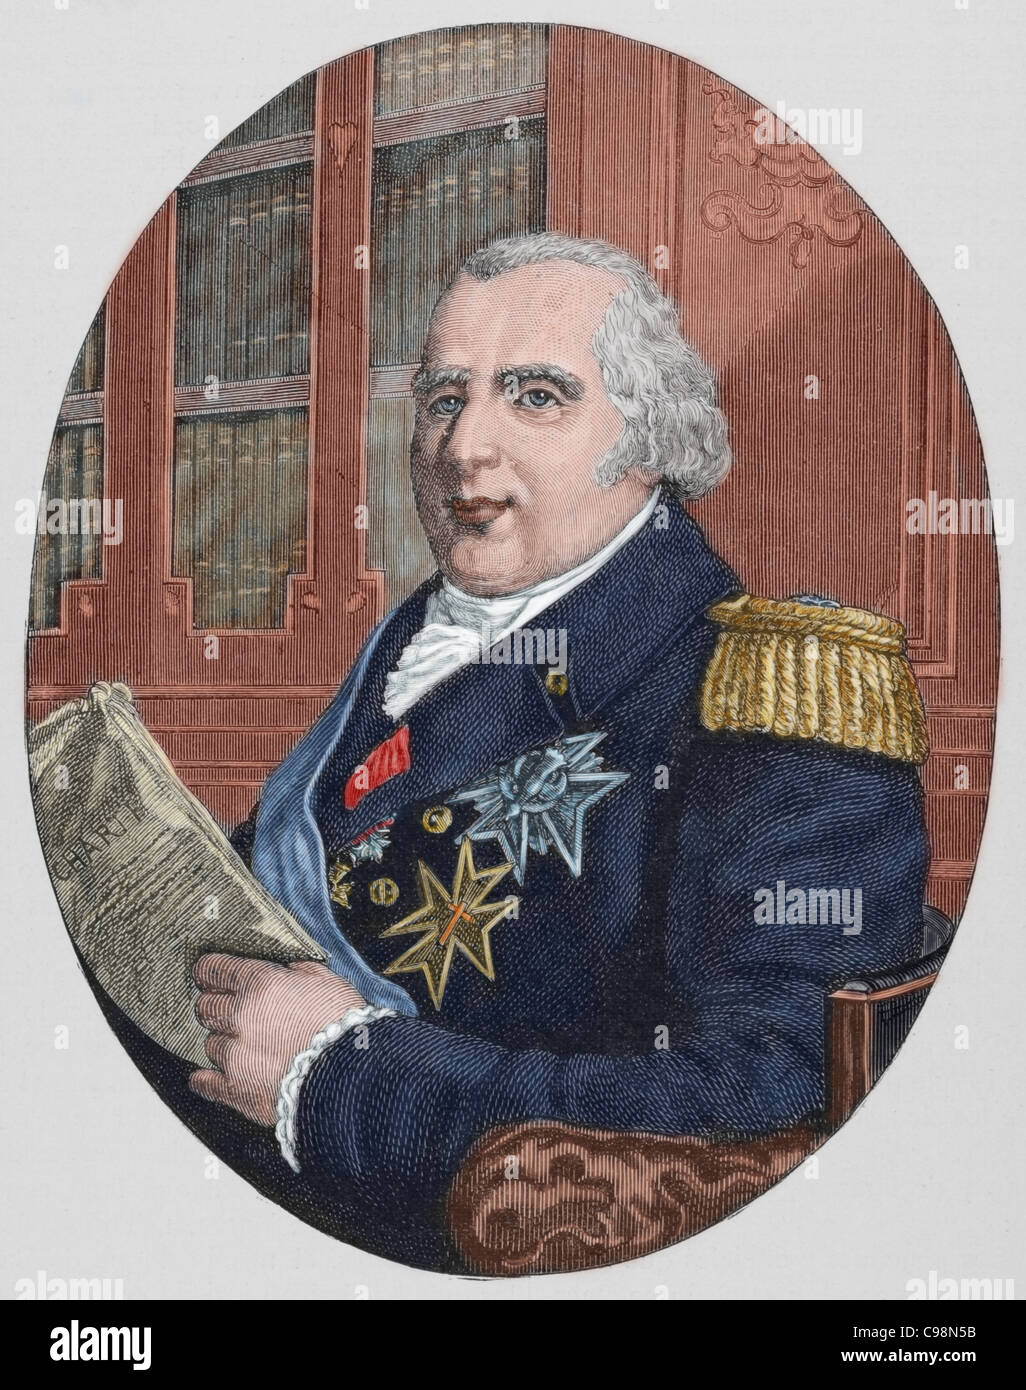 Louis XVIII (1755-1824). King of France from 1814-15 and 1815-24 Stock Photo: 40144871 - Alamy